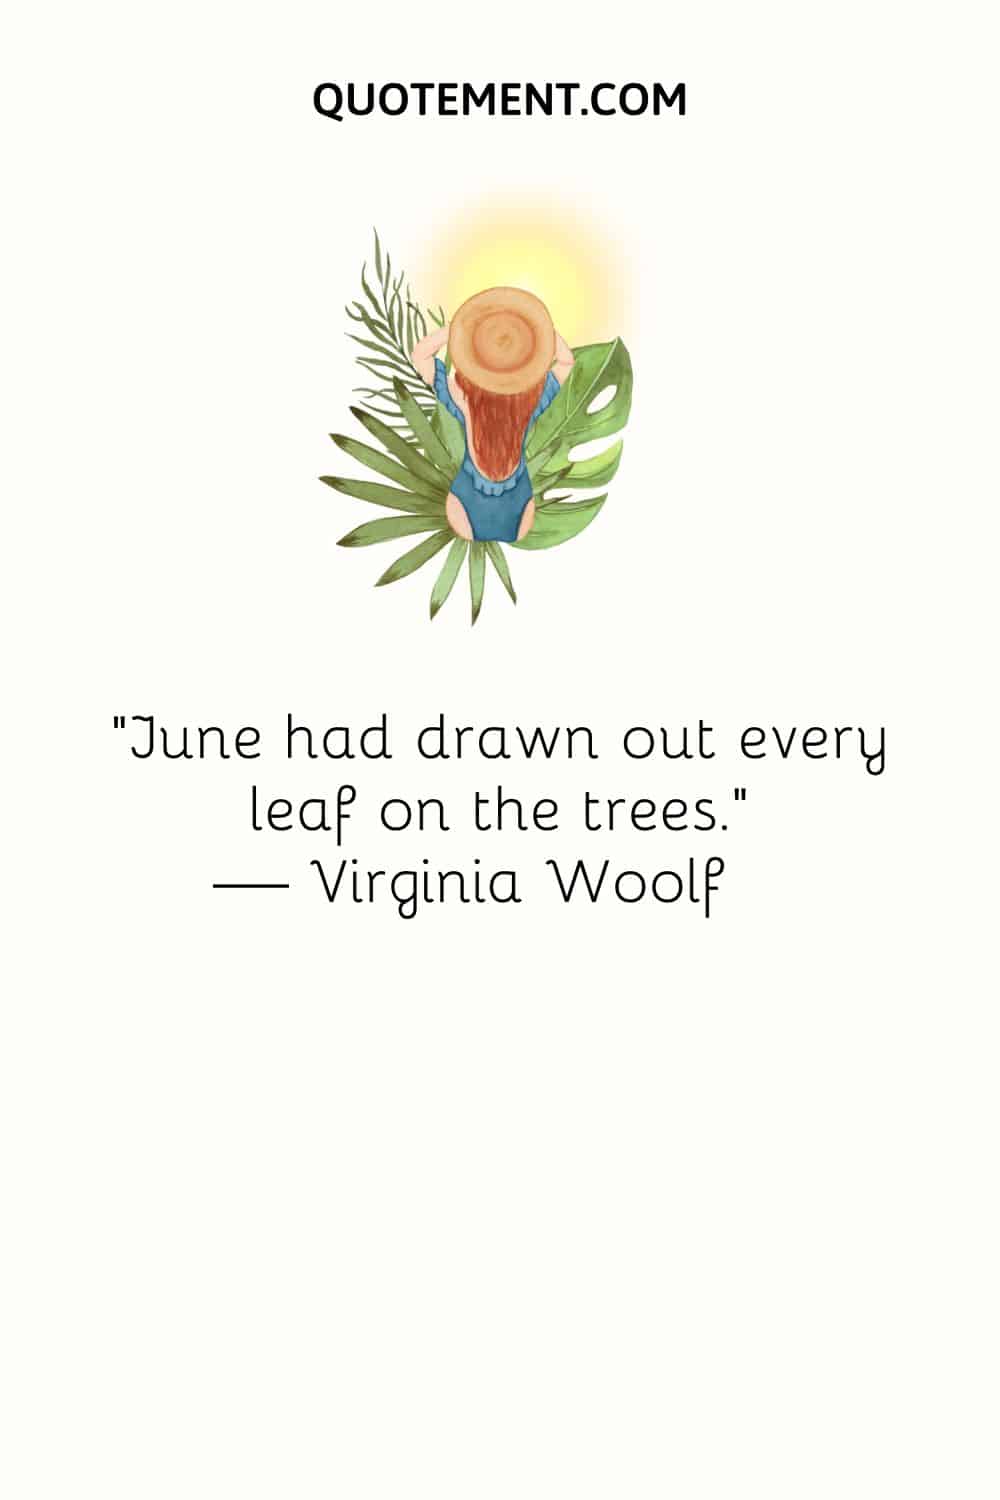 “June had drawn out every leaf on the trees.” — Virginia Woolf